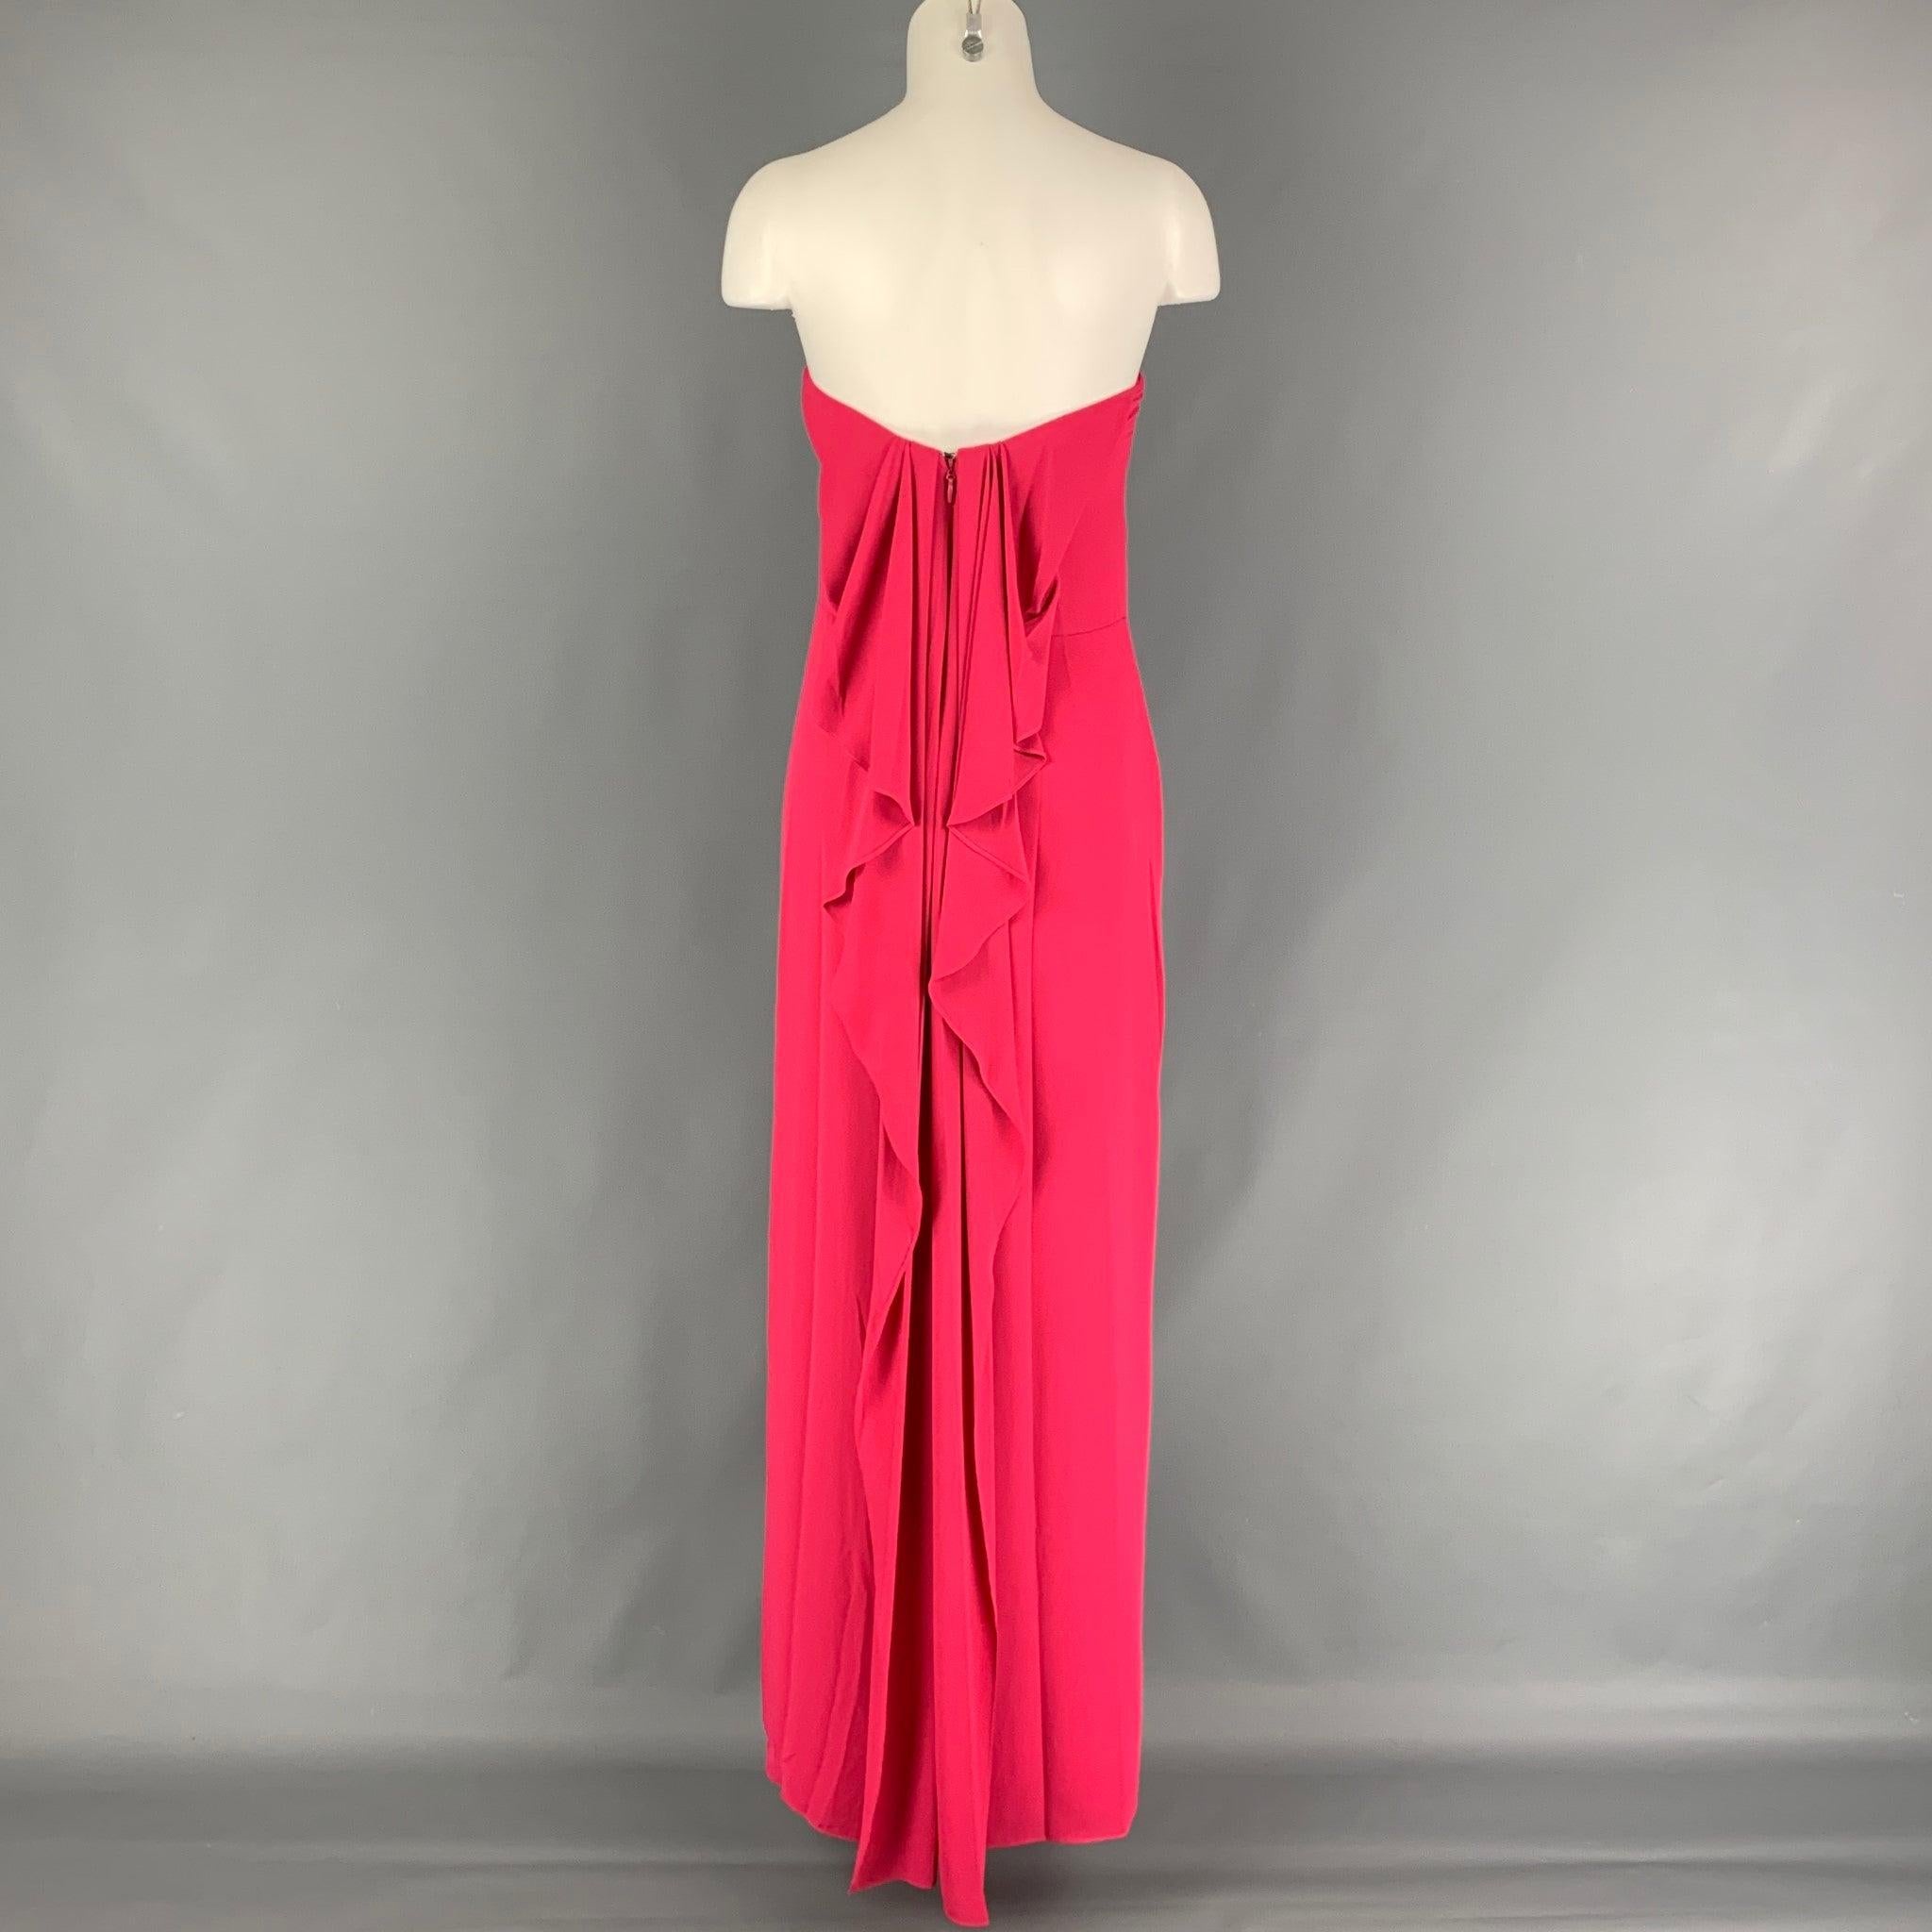 HALSTON HERITAGE Size 0 Pink Polyester Strapless Dress In Good Condition For Sale In San Francisco, CA